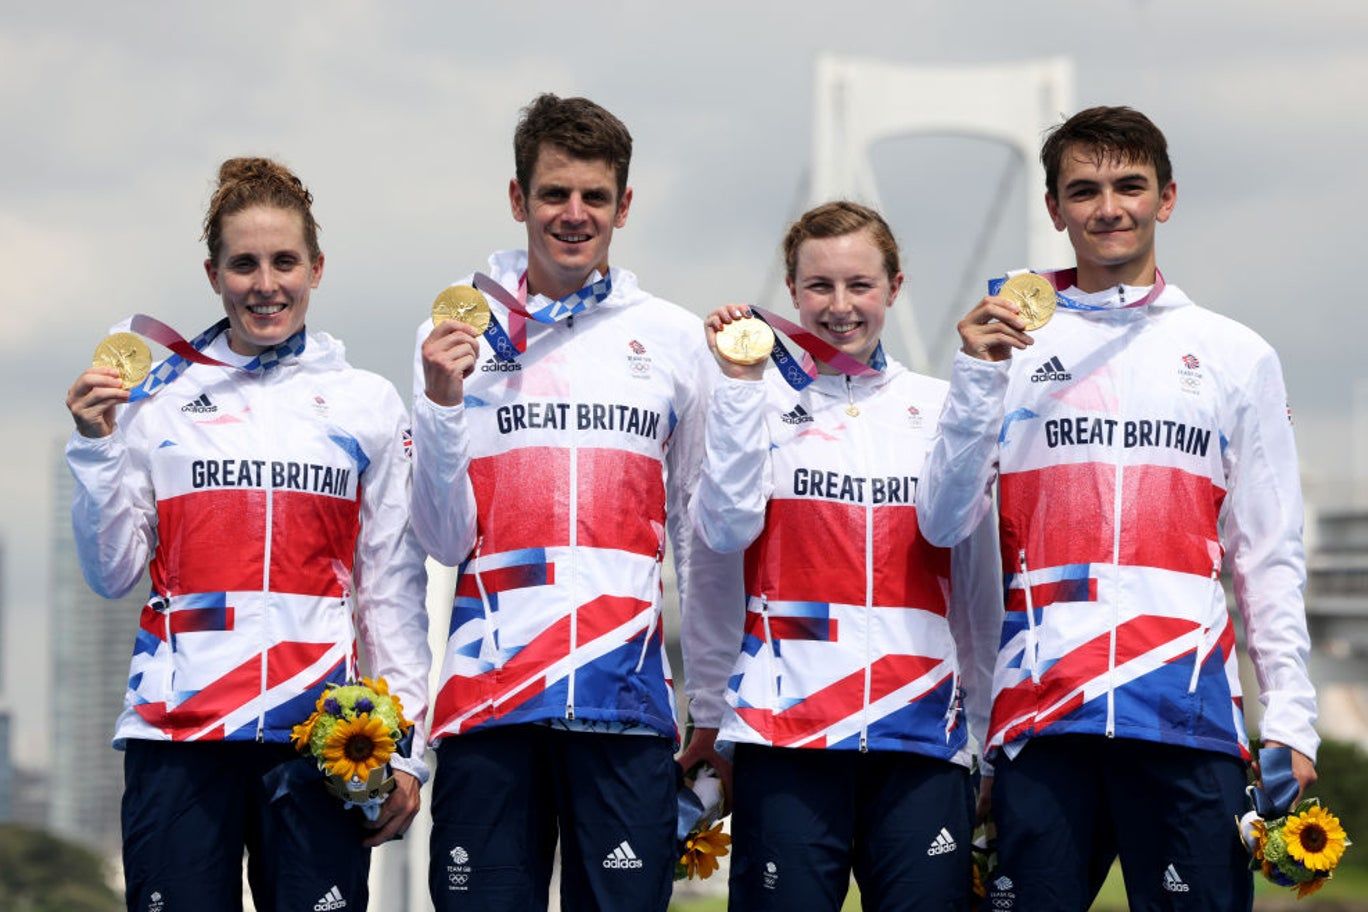 The Queen congratulates Team GB’s Olympic heroes in special message